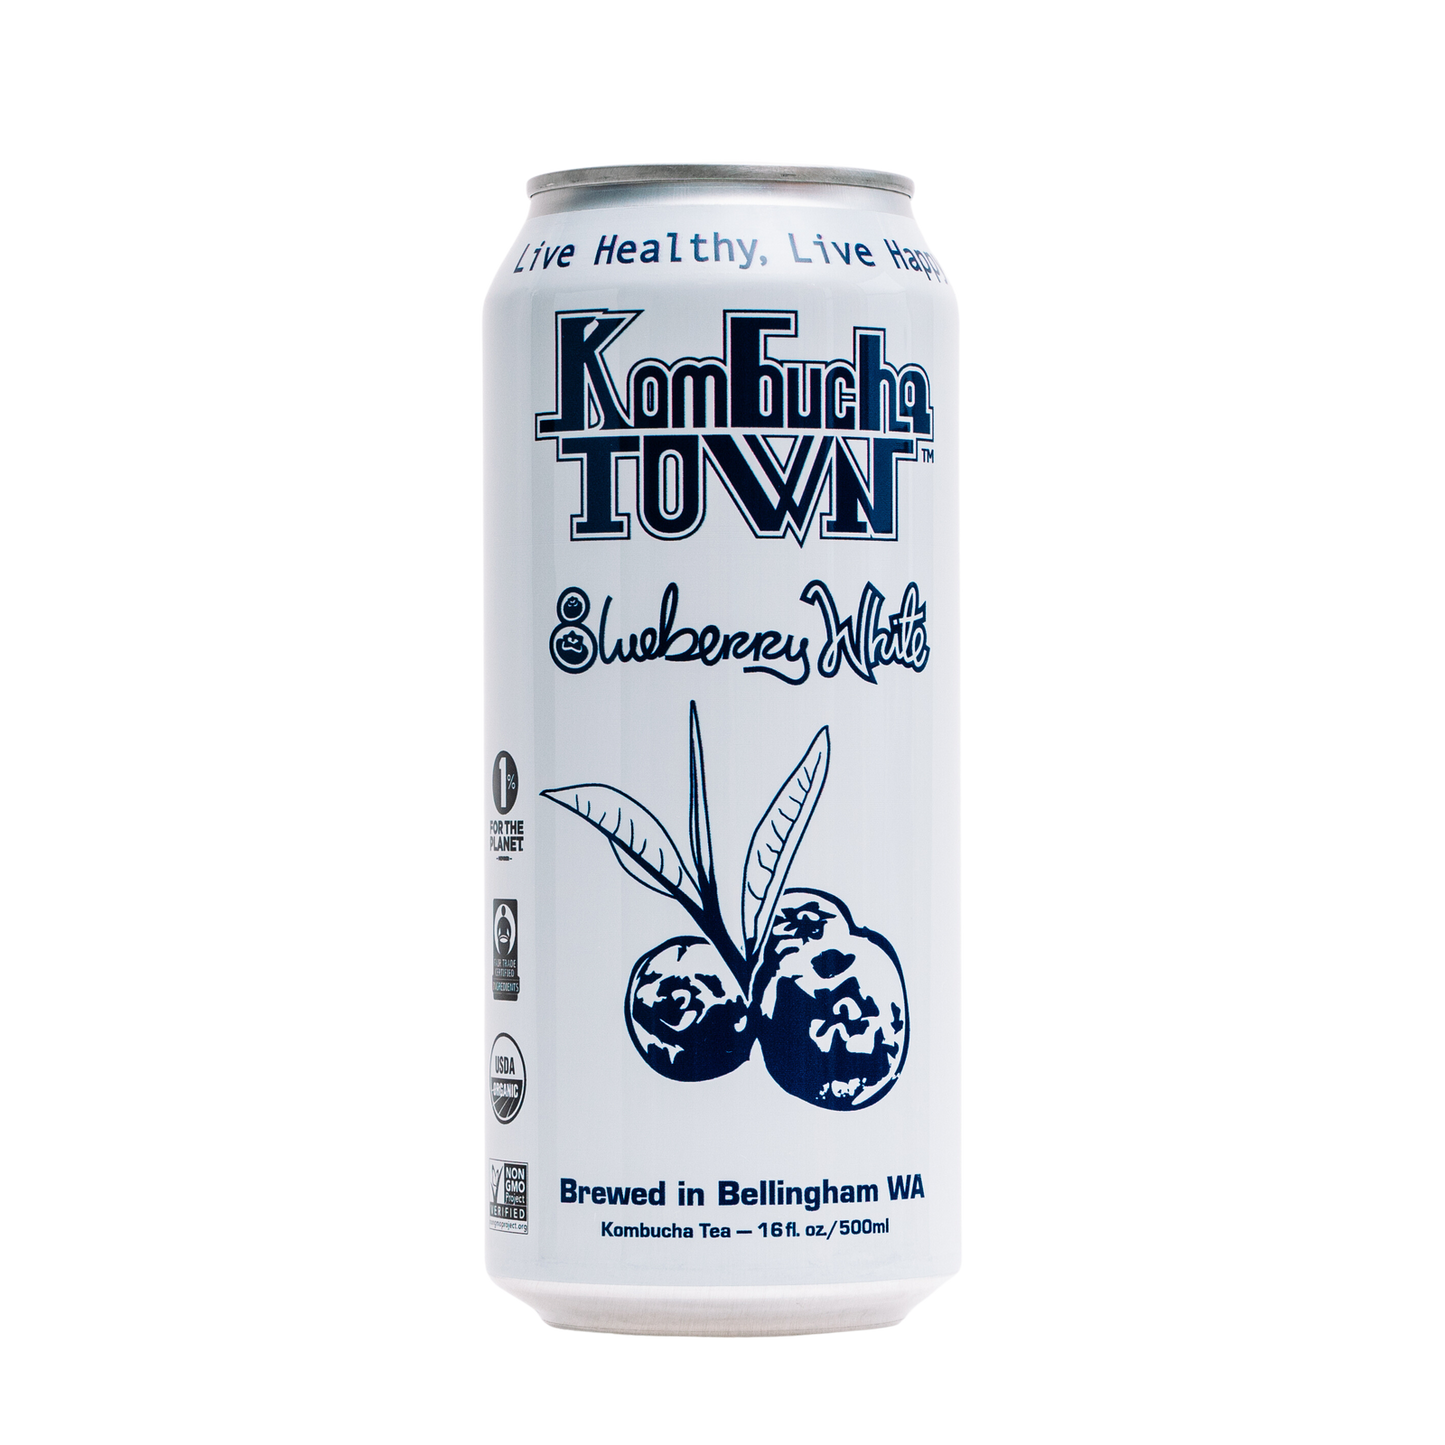 KombuchaTown - Blueberry White - 6 or 12 pack of 16oz cans